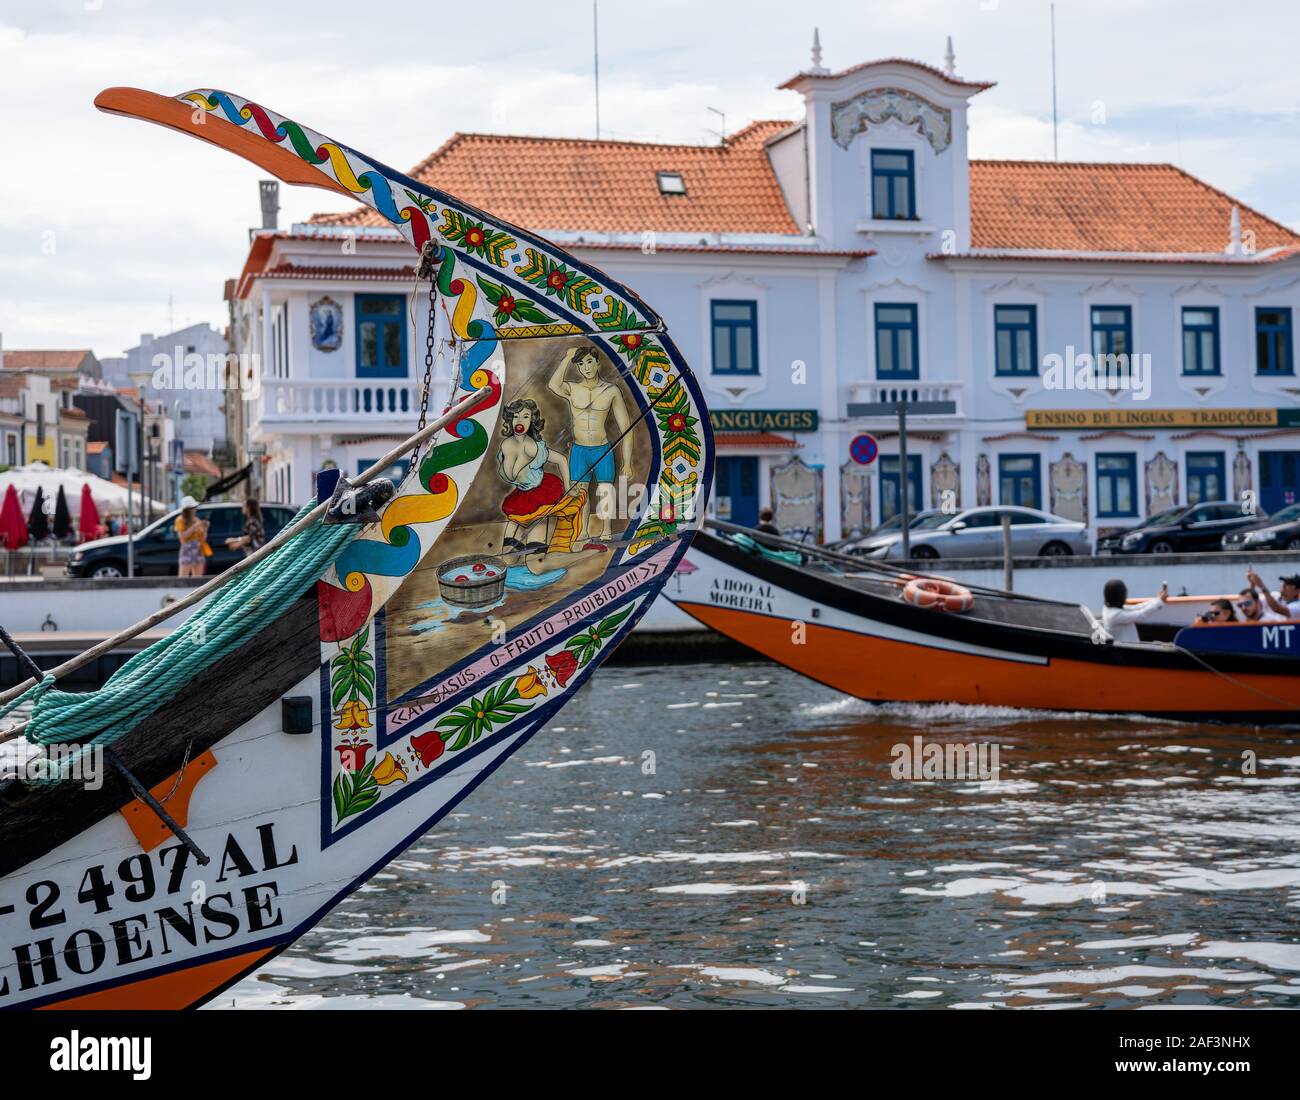 Aveiro, Portugal - 19 August 2019: Risque paintings on the rudder of the tourist boats on Aveiro canals Stock Photo